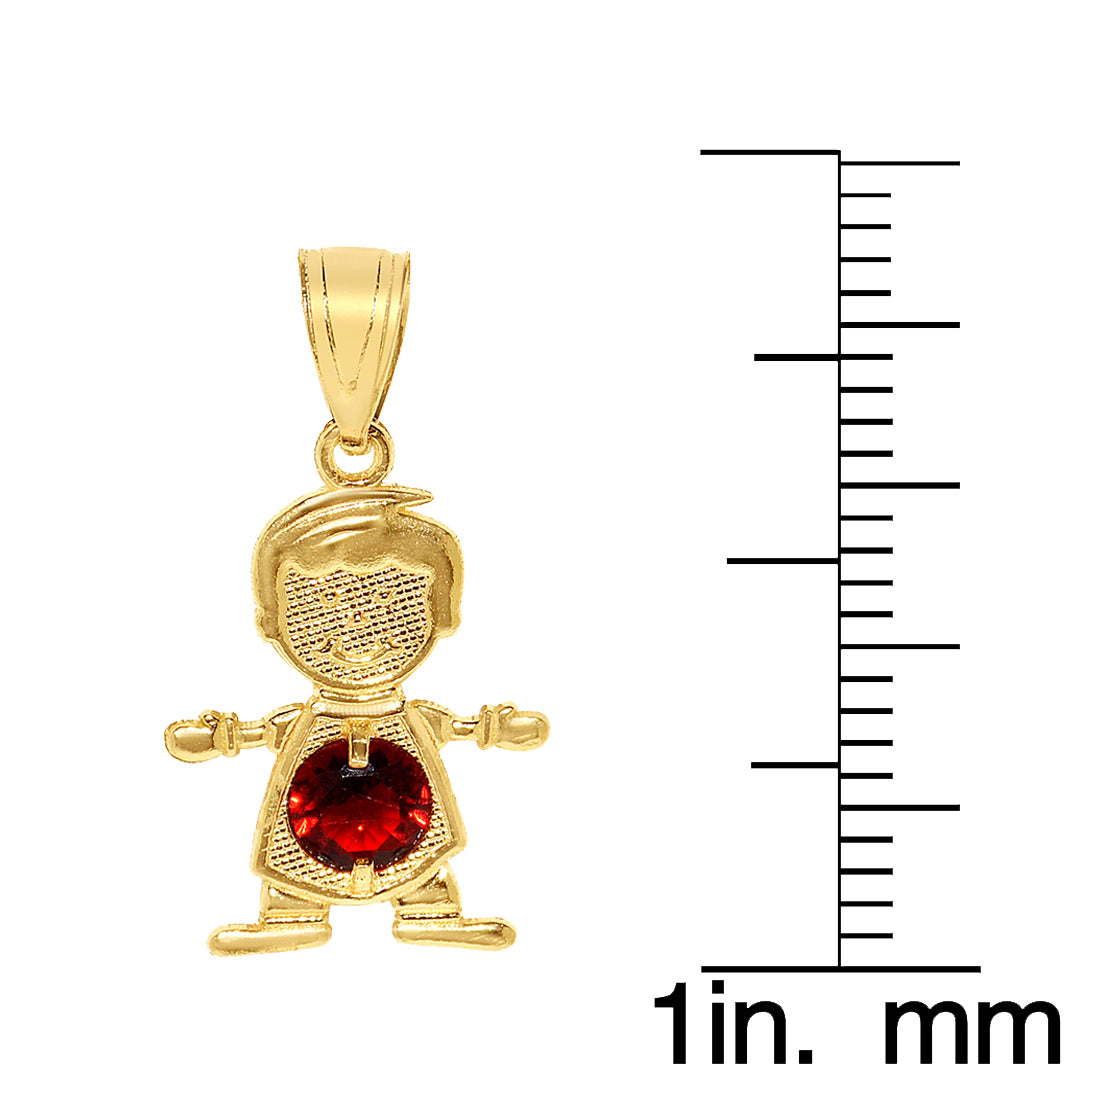 14k Yellow Gold Round-cut Cubic Zirconia March Birthstone Boy/Son Pendant with Square Wheat Chain